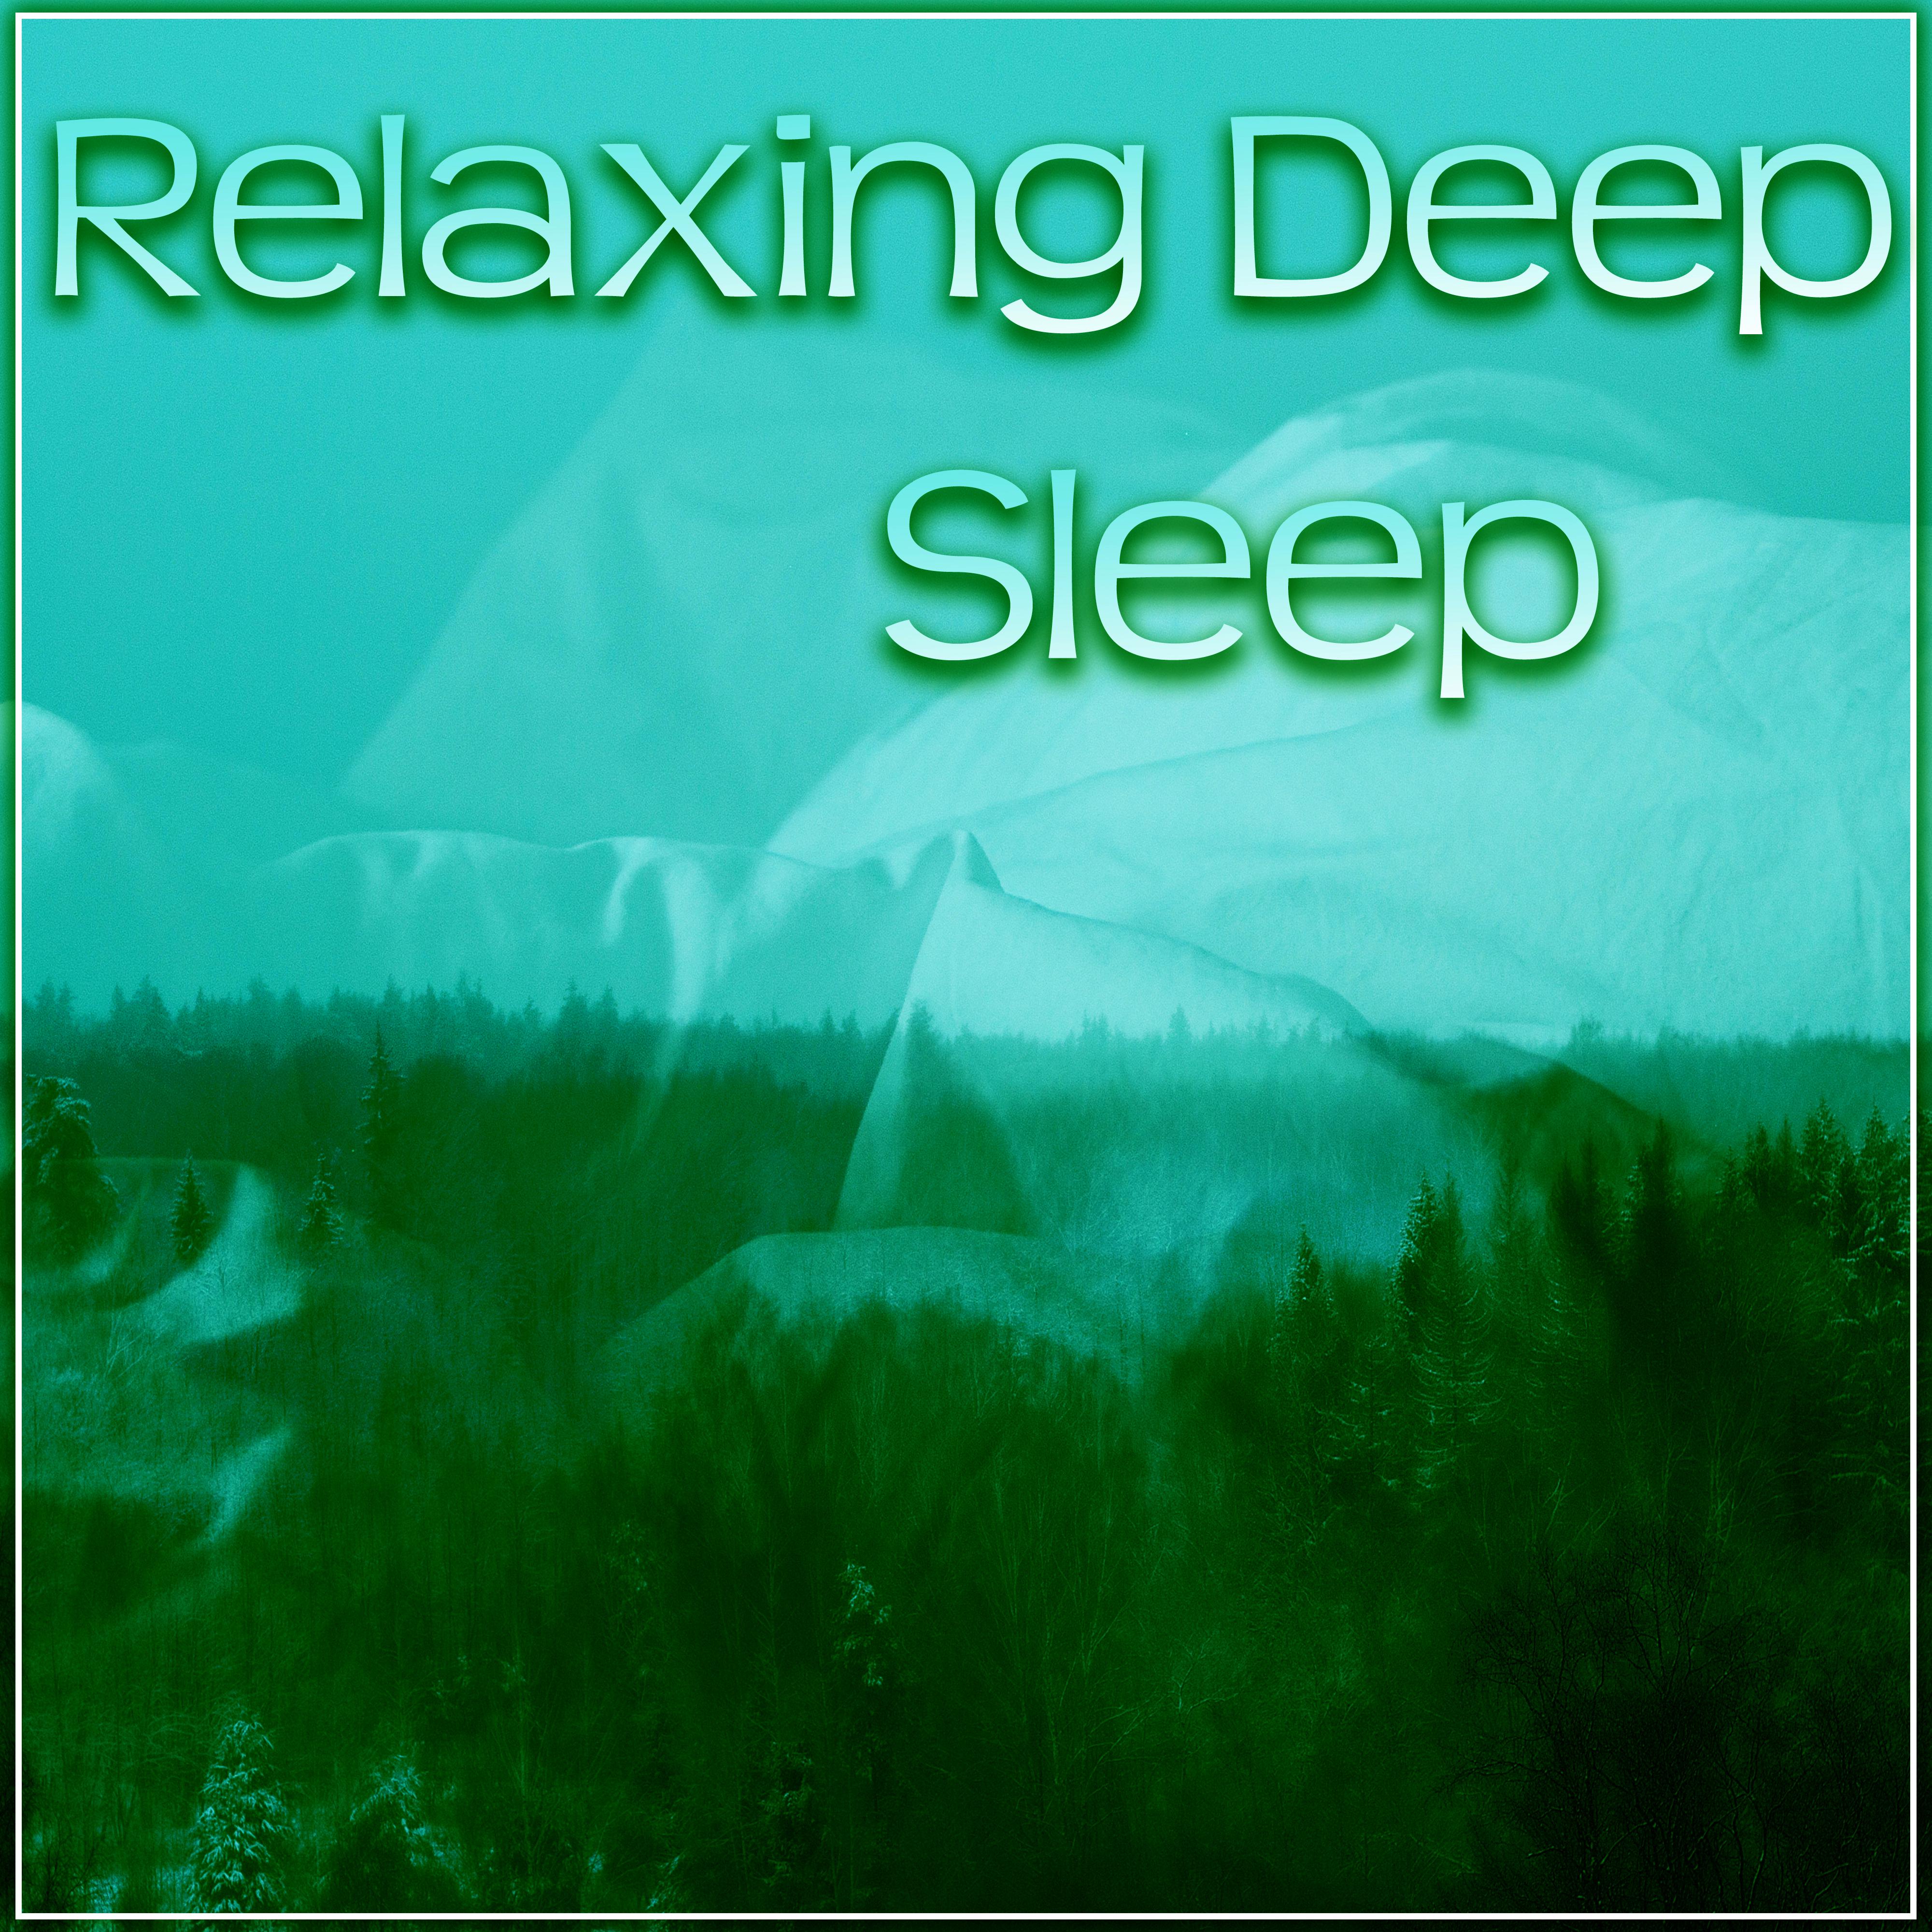 Relaxing Deep Sleep  Nature, Dream, Therapy Sleep, Total Relax, Easy Listening, Peaceful Music